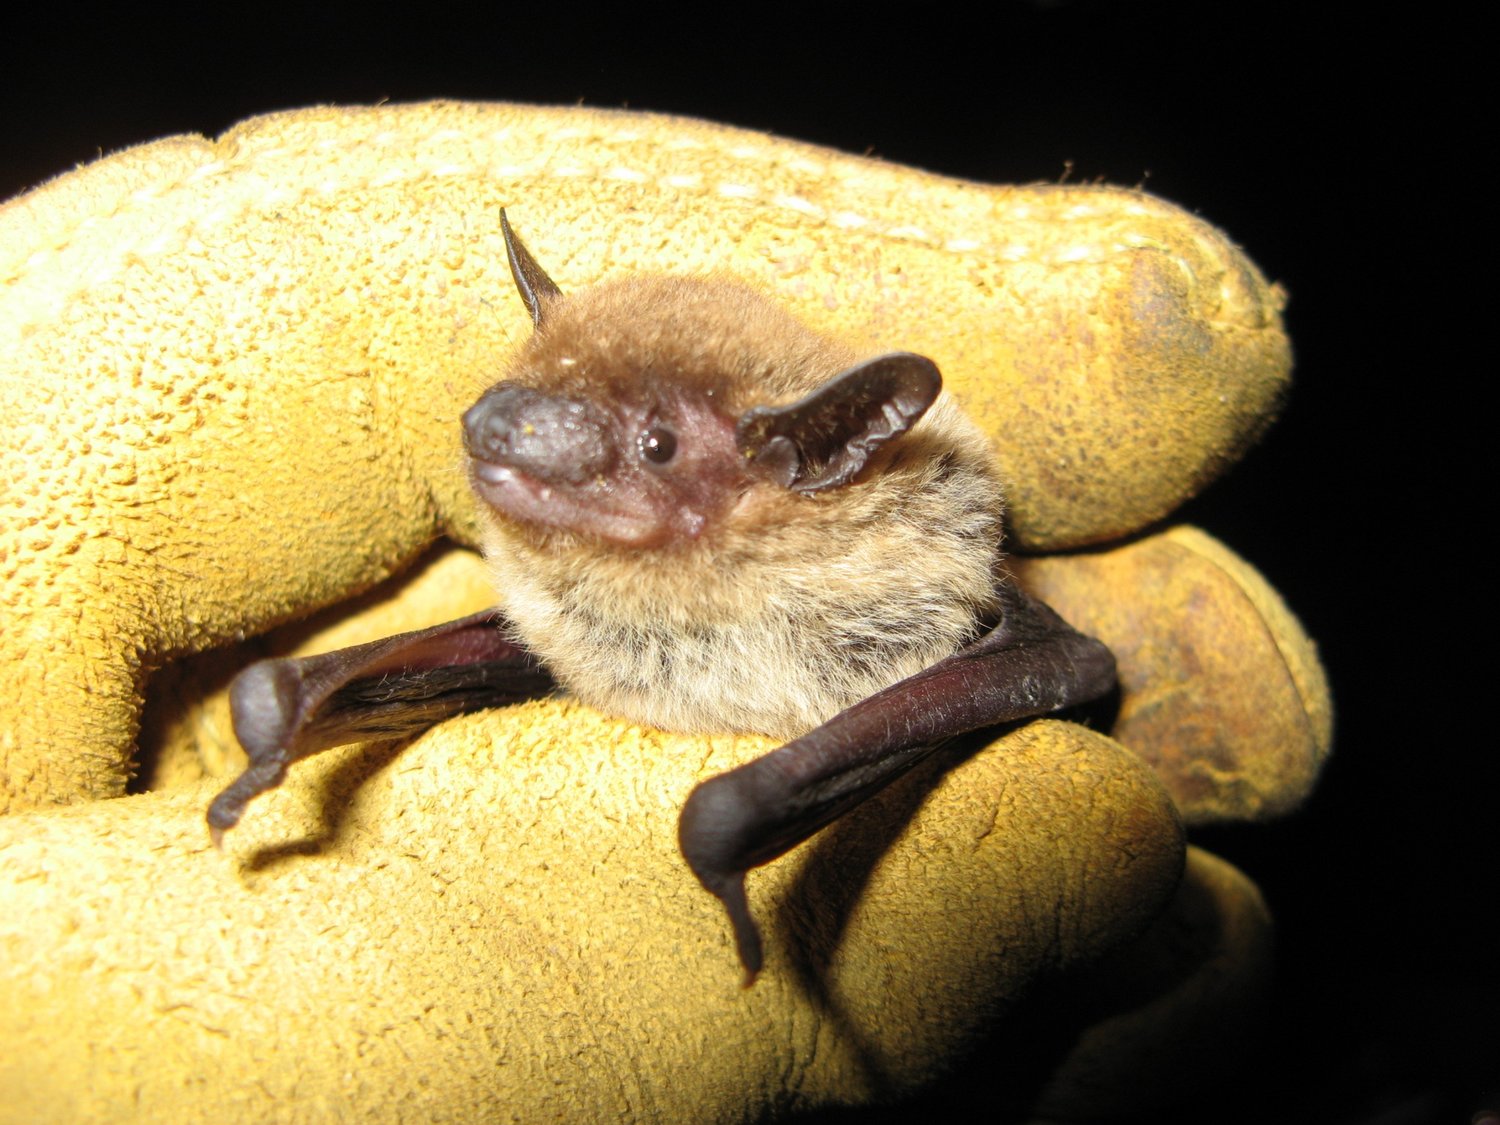 Florida boasts 13 native bat species, all of which are both ecologically and economically beneficial.